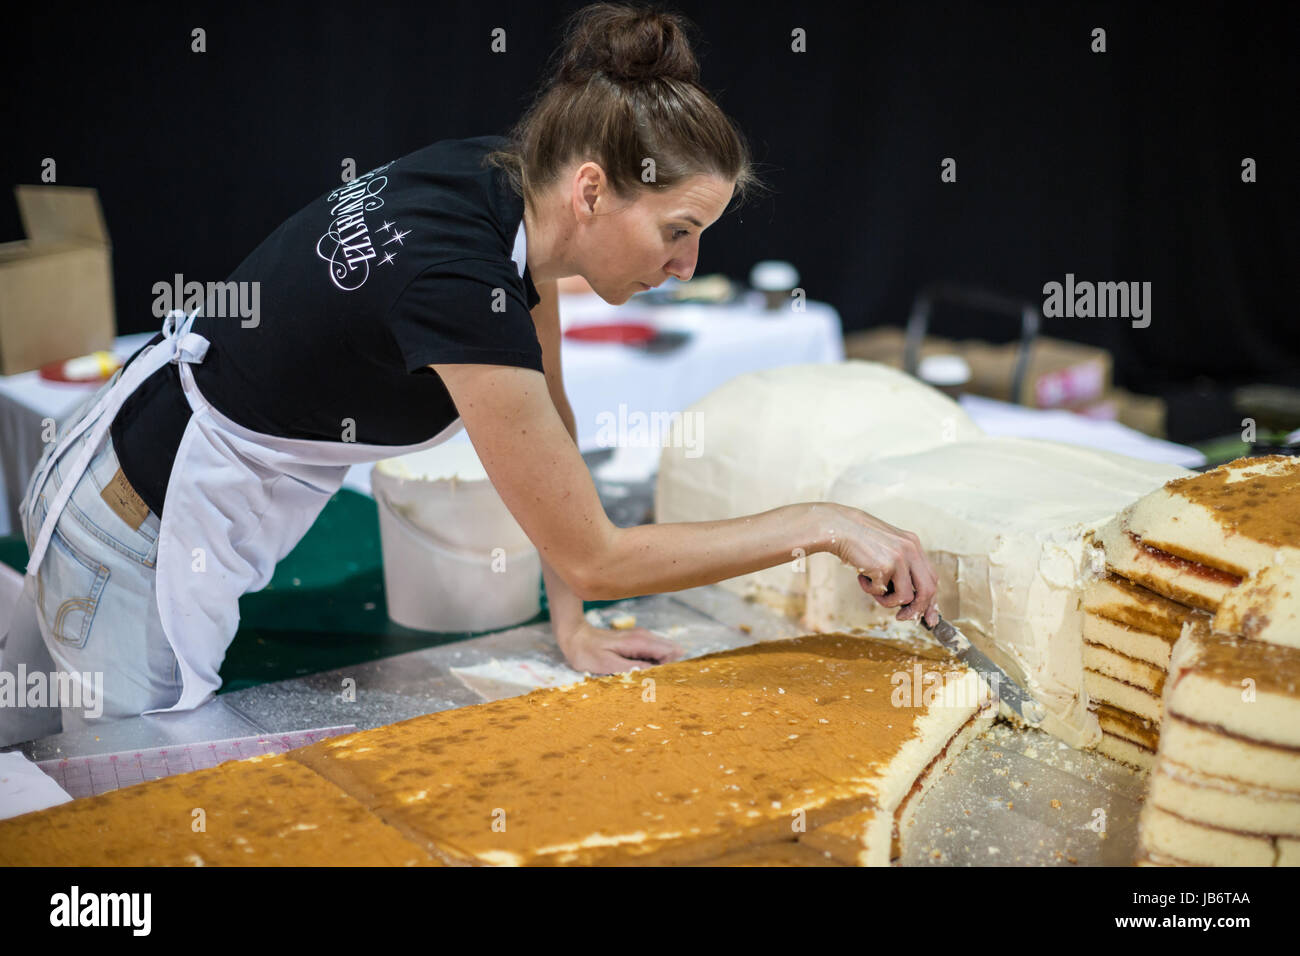 Manchester, UK. 9th Jun, 2017. An 8ft by 6ft cake Worker Bee is baked and constructed by Alana Lily Cakes to be sold to raise funds for the 'We Love Manchester' appeal following the suicide bombing in May. The Worker Bee symbol originated during the Industrial Revolution; originally representing the hard work of Mancunians, it has now been adopted as a symbol of unity against terrorism. Credit: Michael Buddle/Alamy Live News Stock Photo